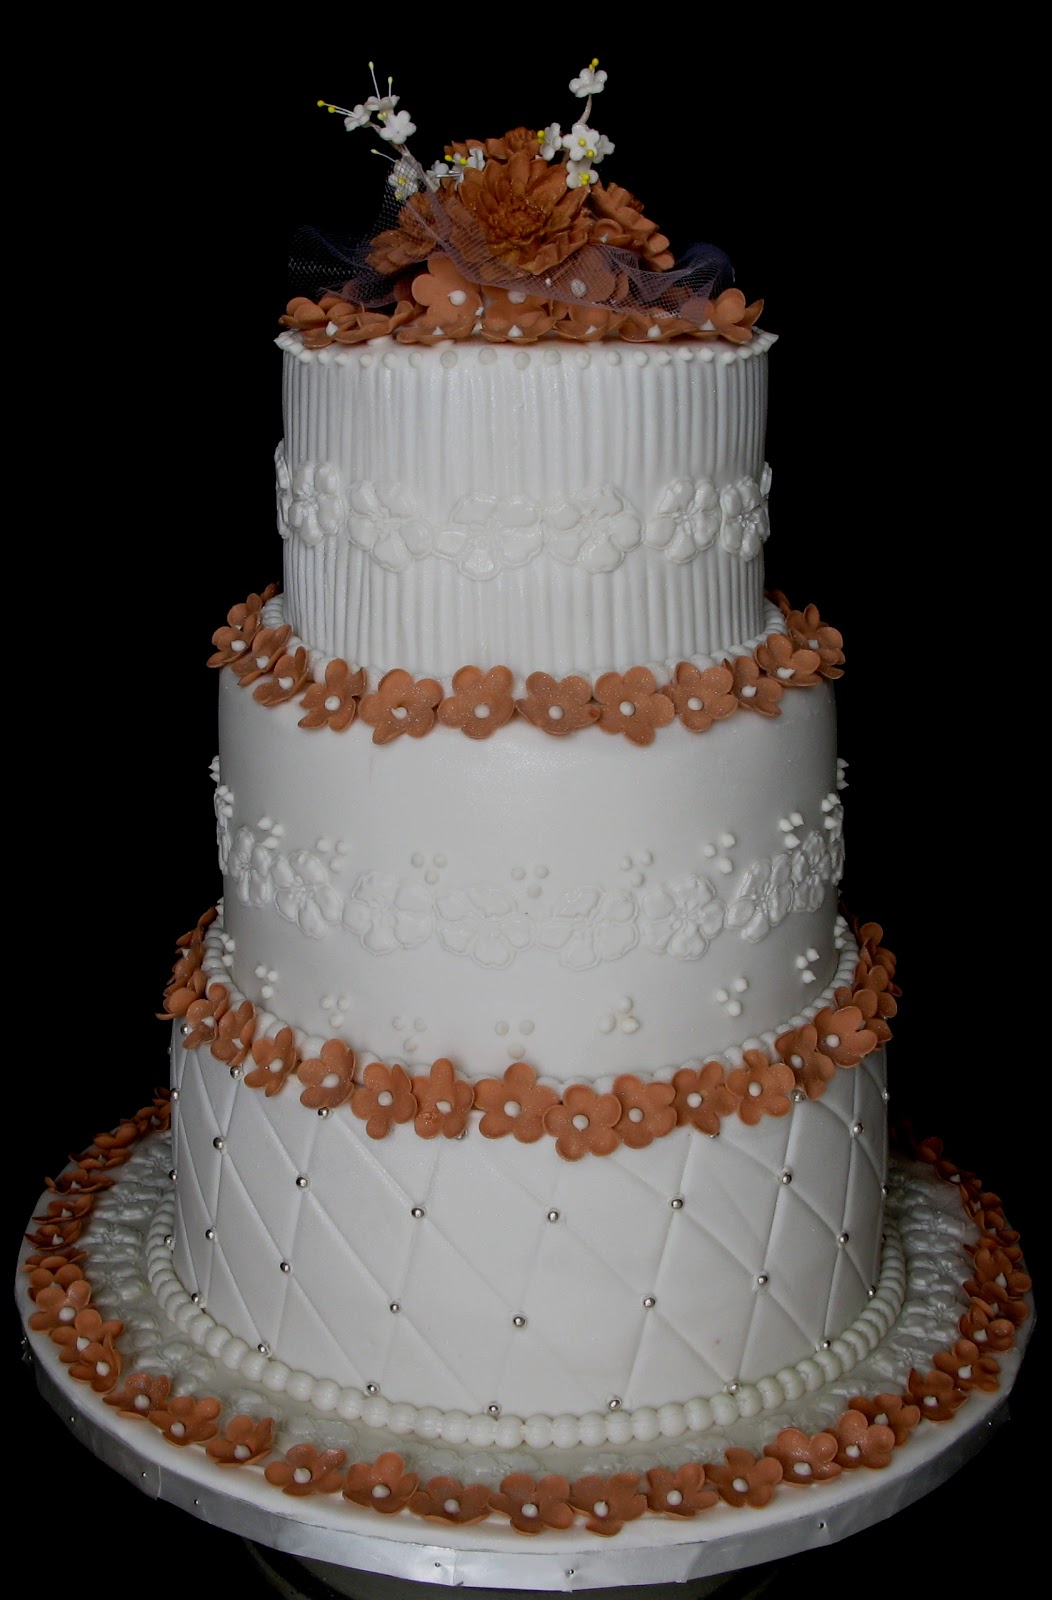 7 Photos of Uneven Layers Wedding Cakes